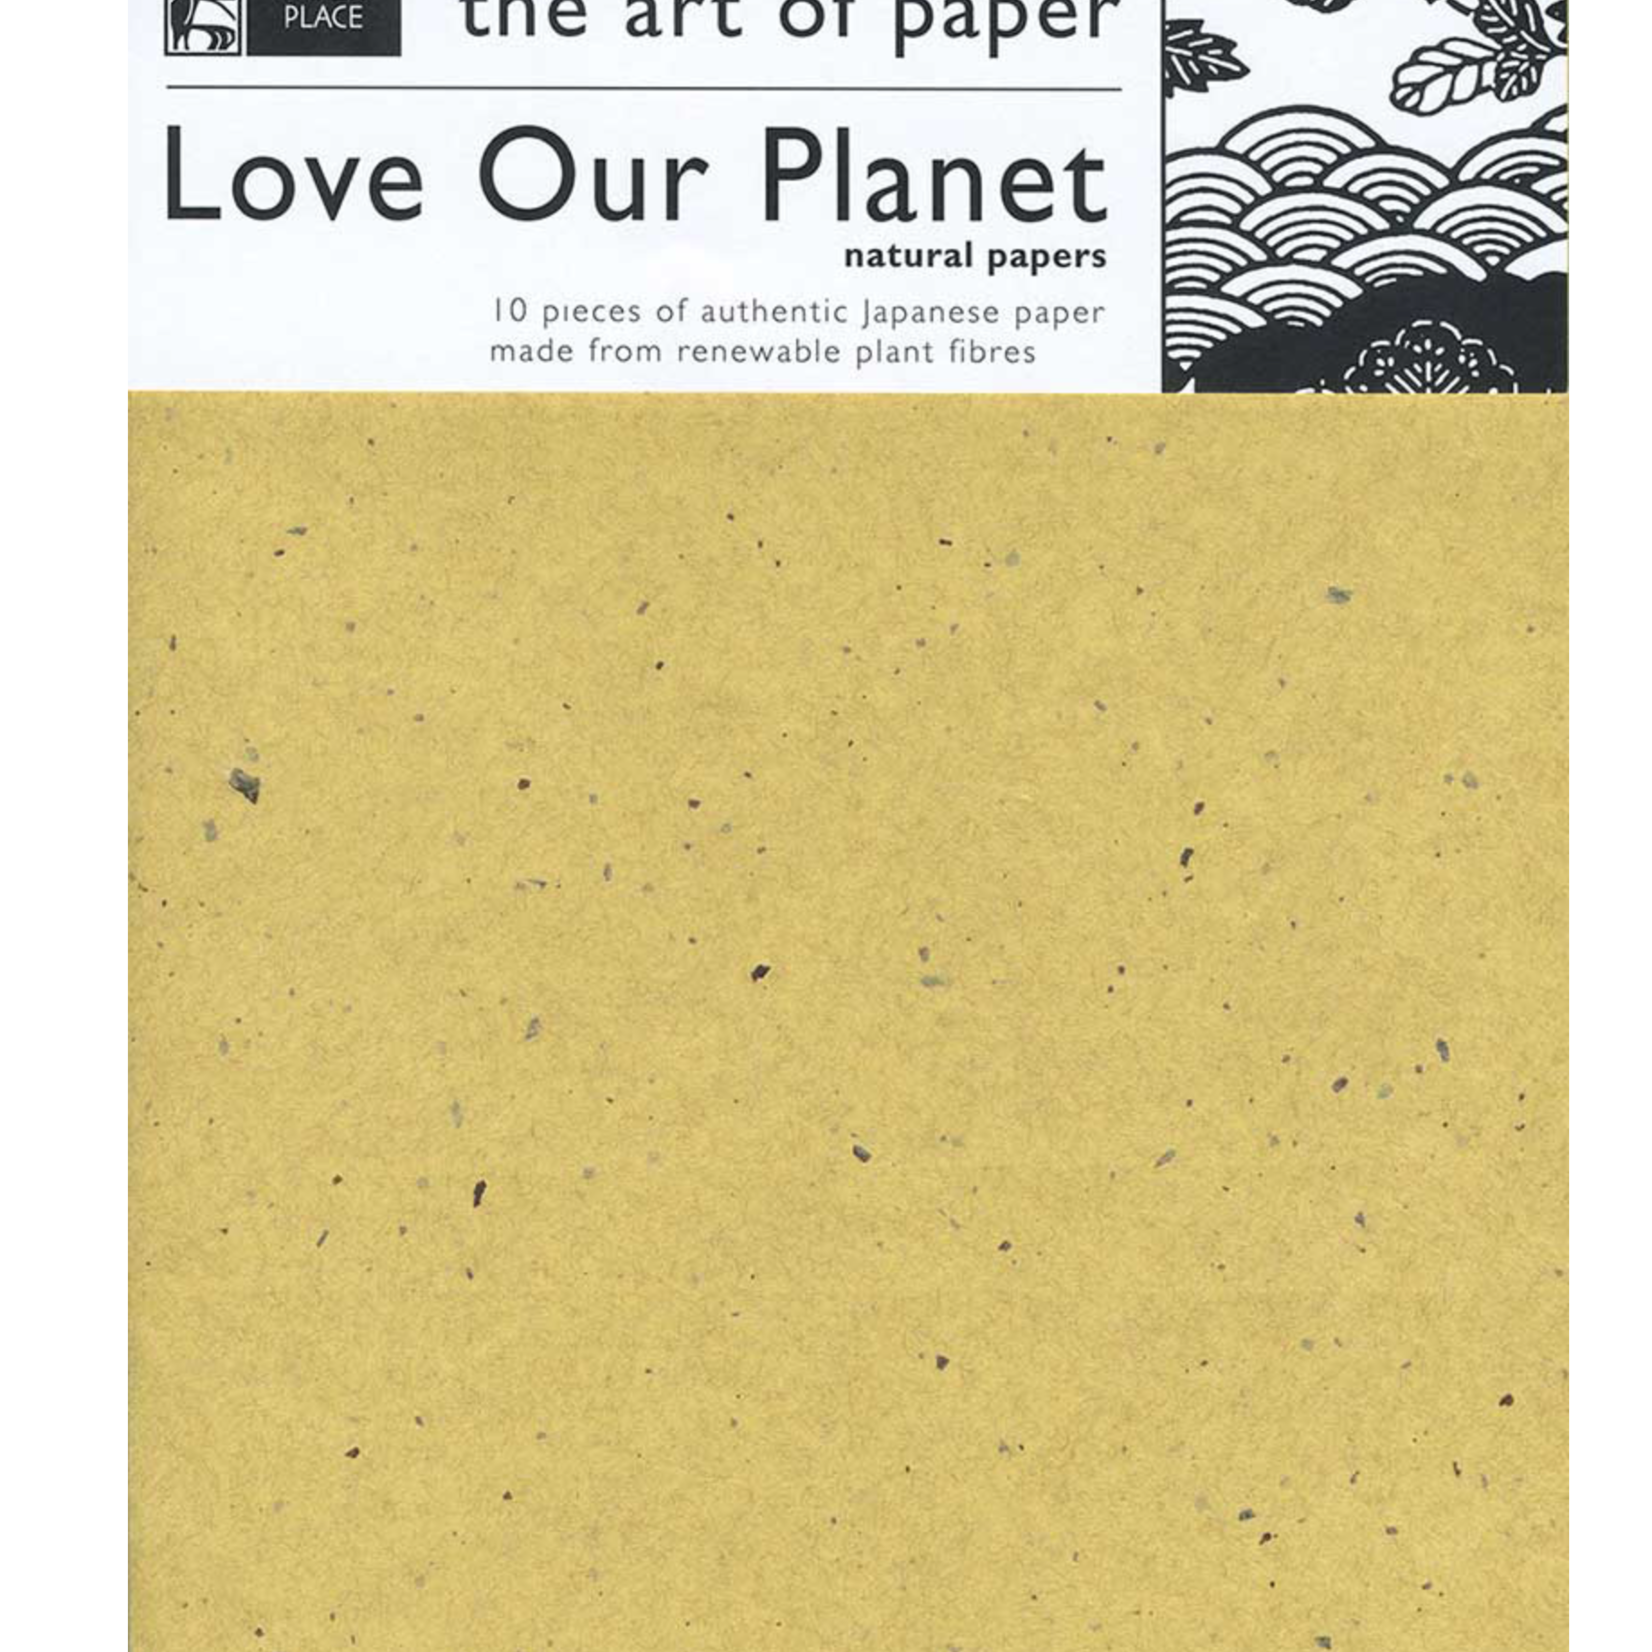 the Japanese paper place natural papers-Love Our Planet